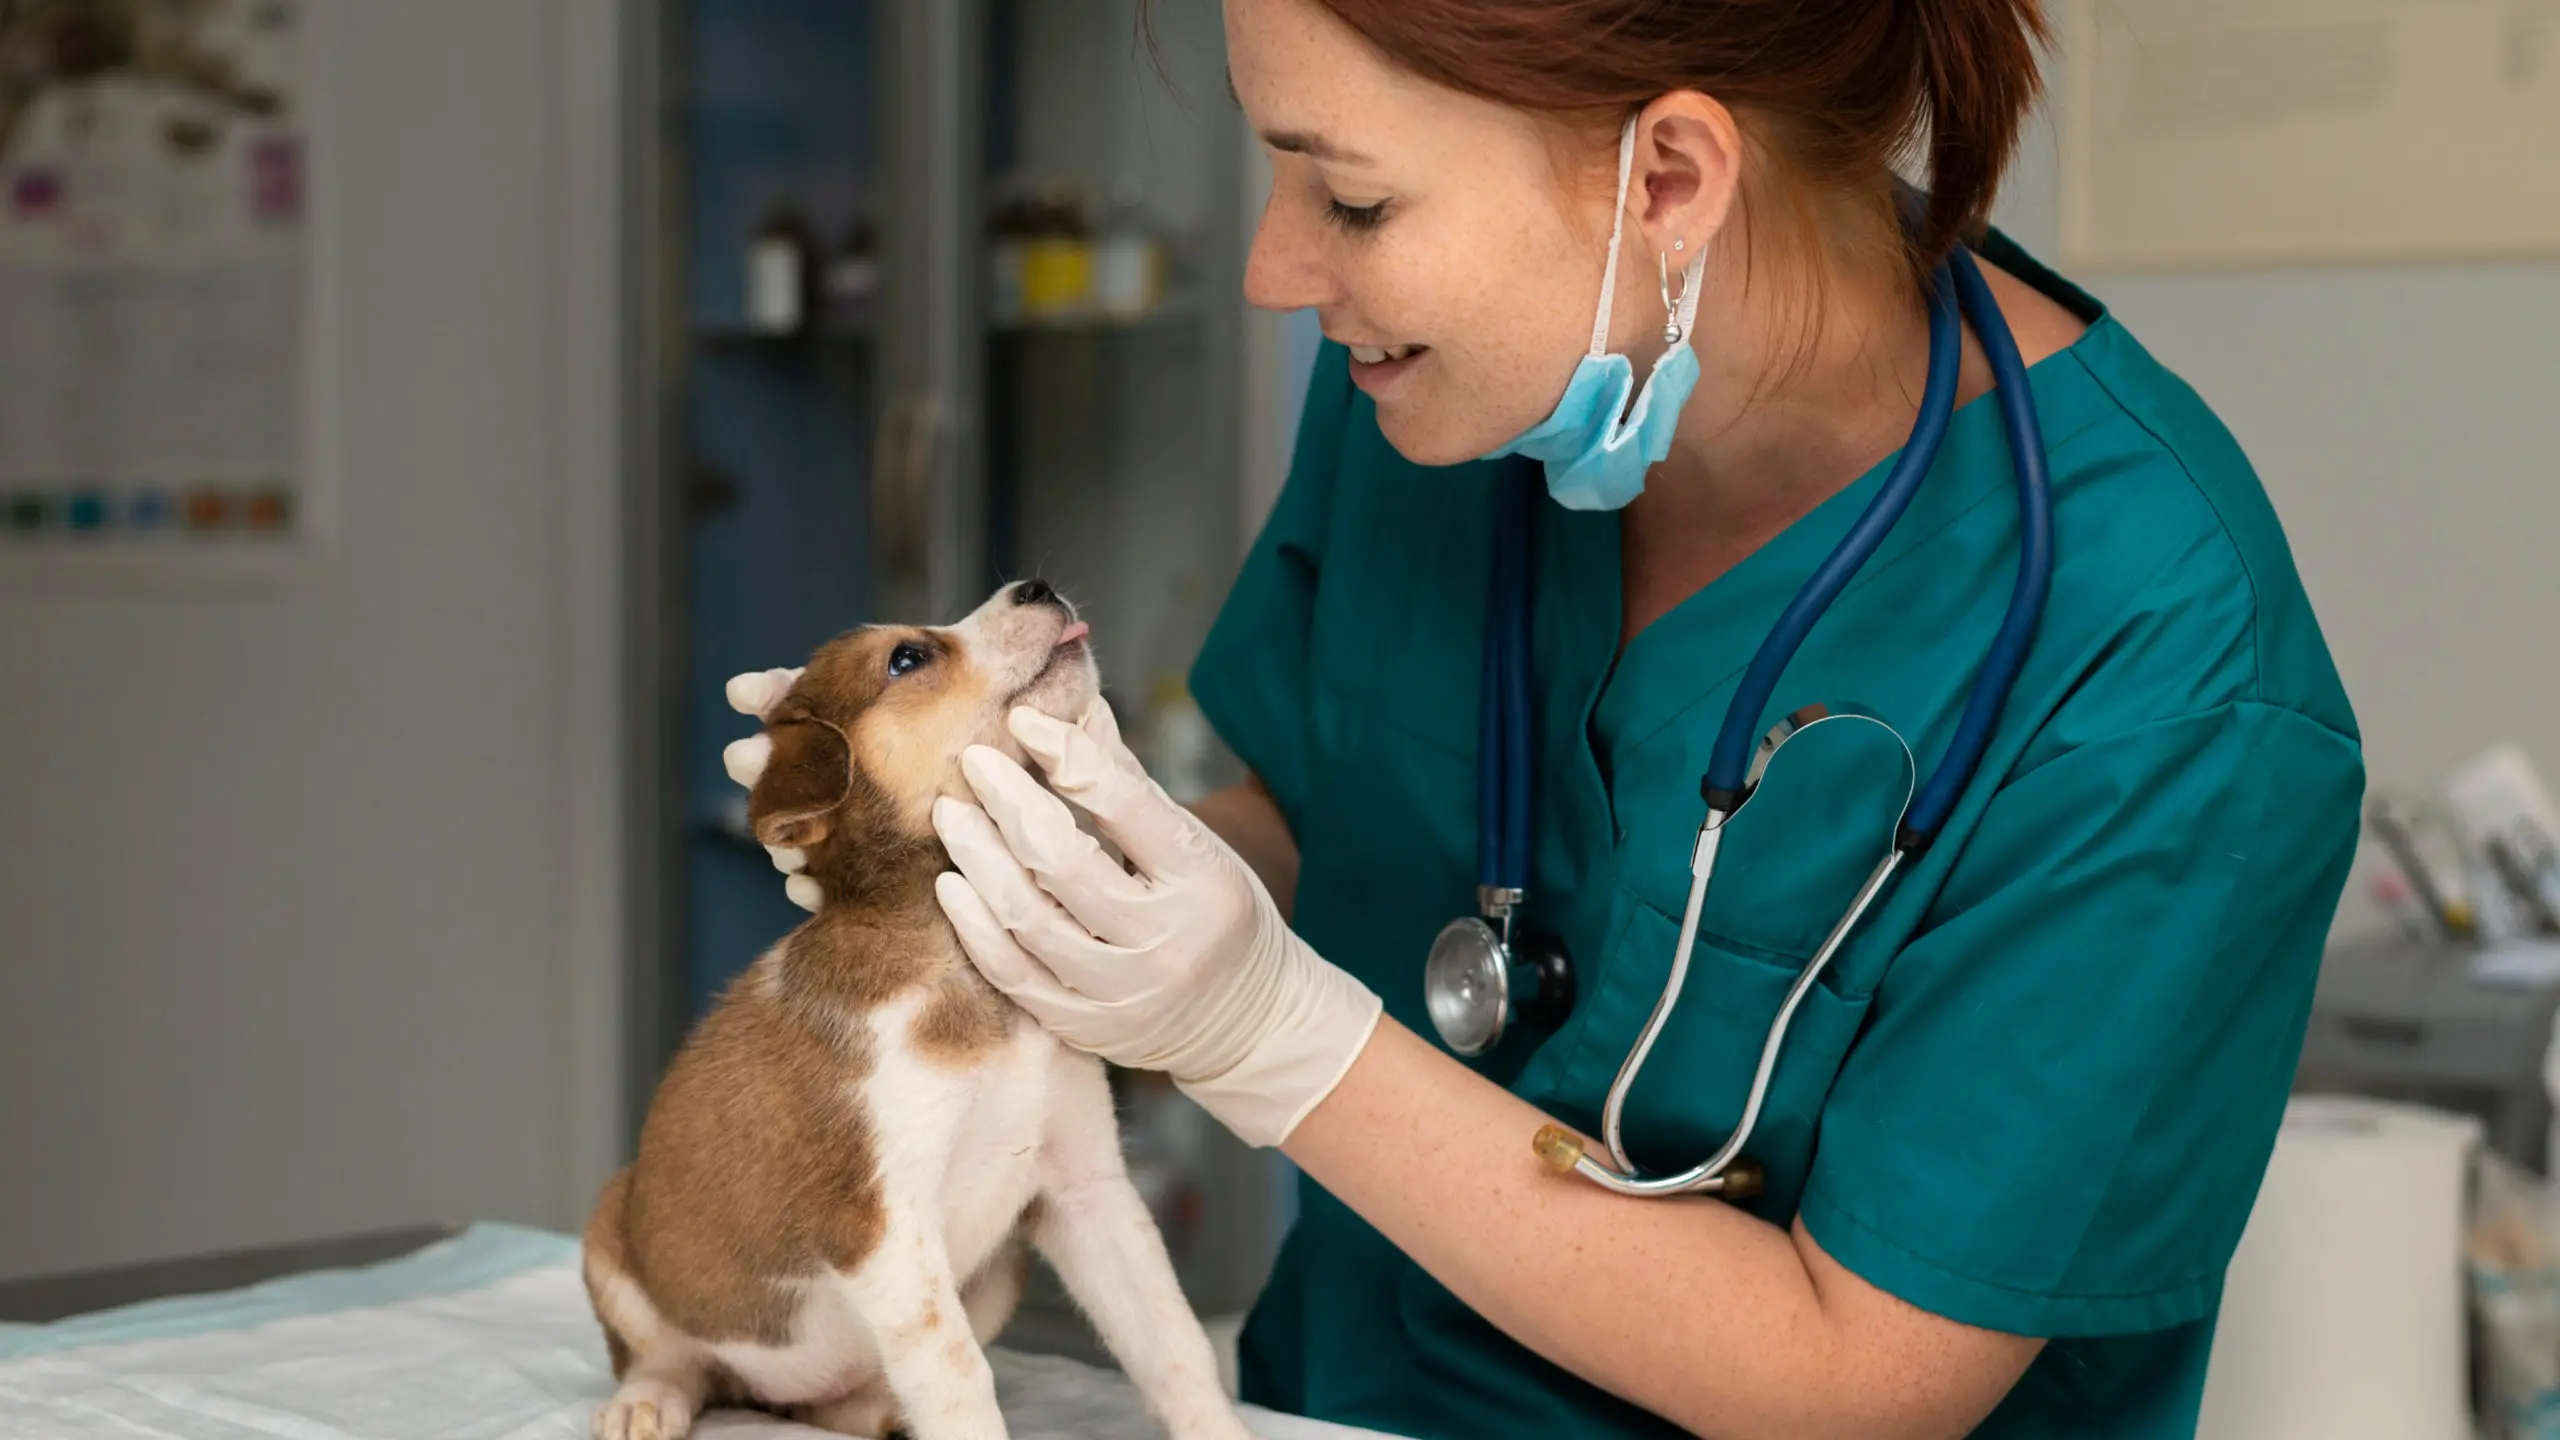 How to Increase the Value of Your Veterinary Practice